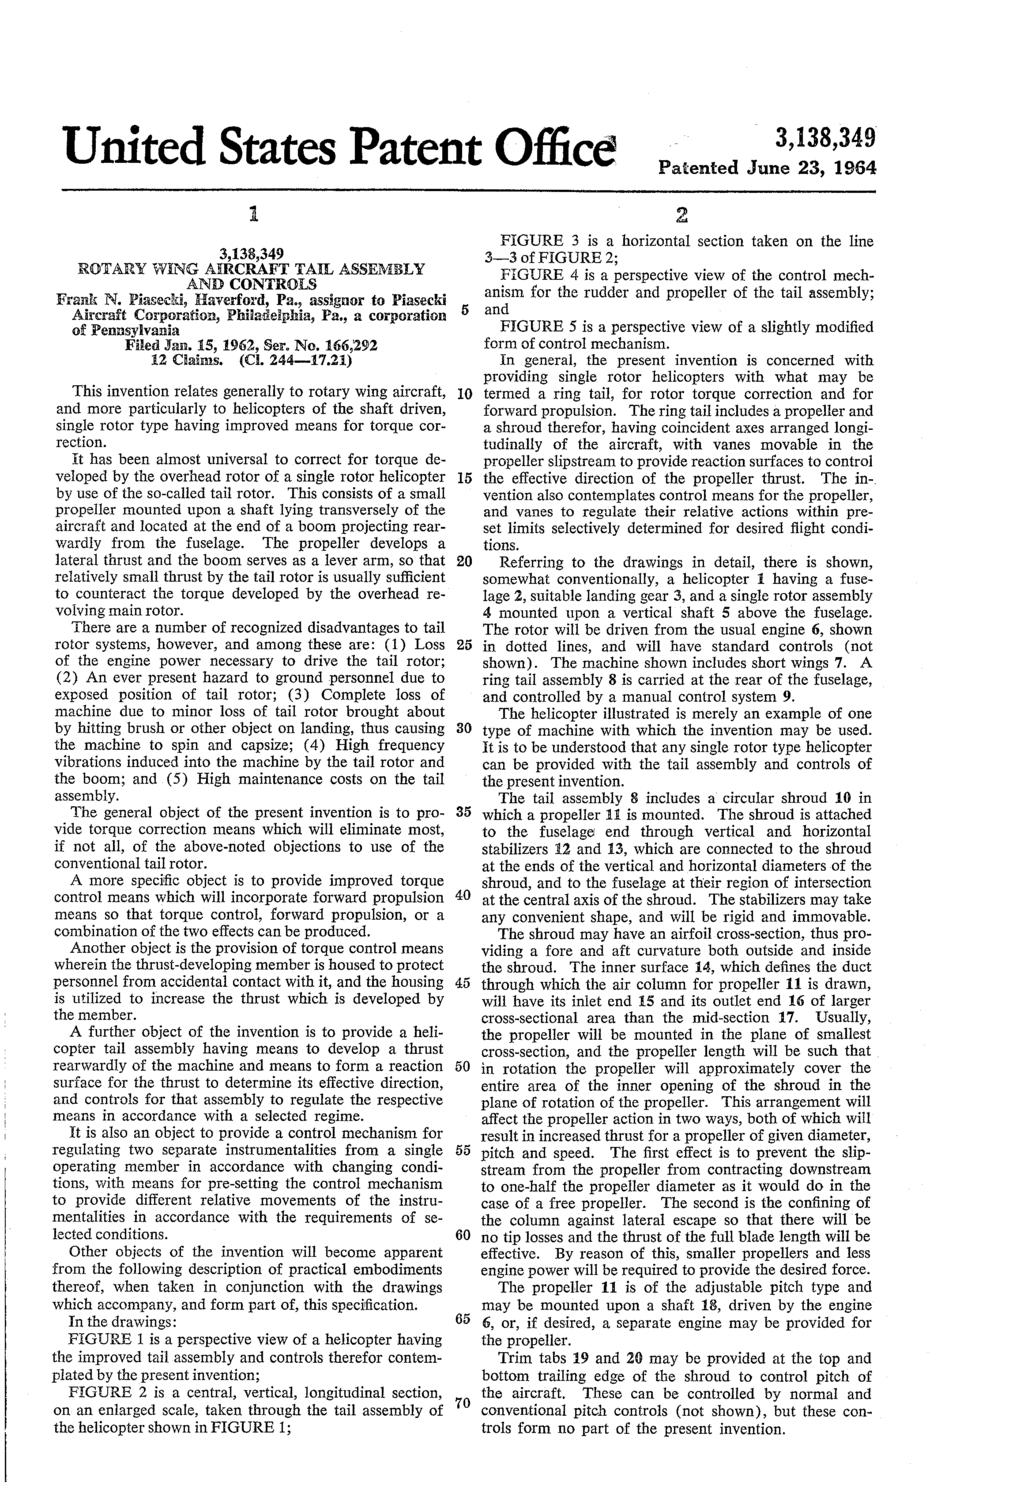 United States Patent Office - 3,138,349 Patiented June 23, 1964 3,138,349 RCTARY WENG ARCRAFT TAL ASSEMBLY AND CONTROLS Frank N. Piasecki, Haverford, Pa.